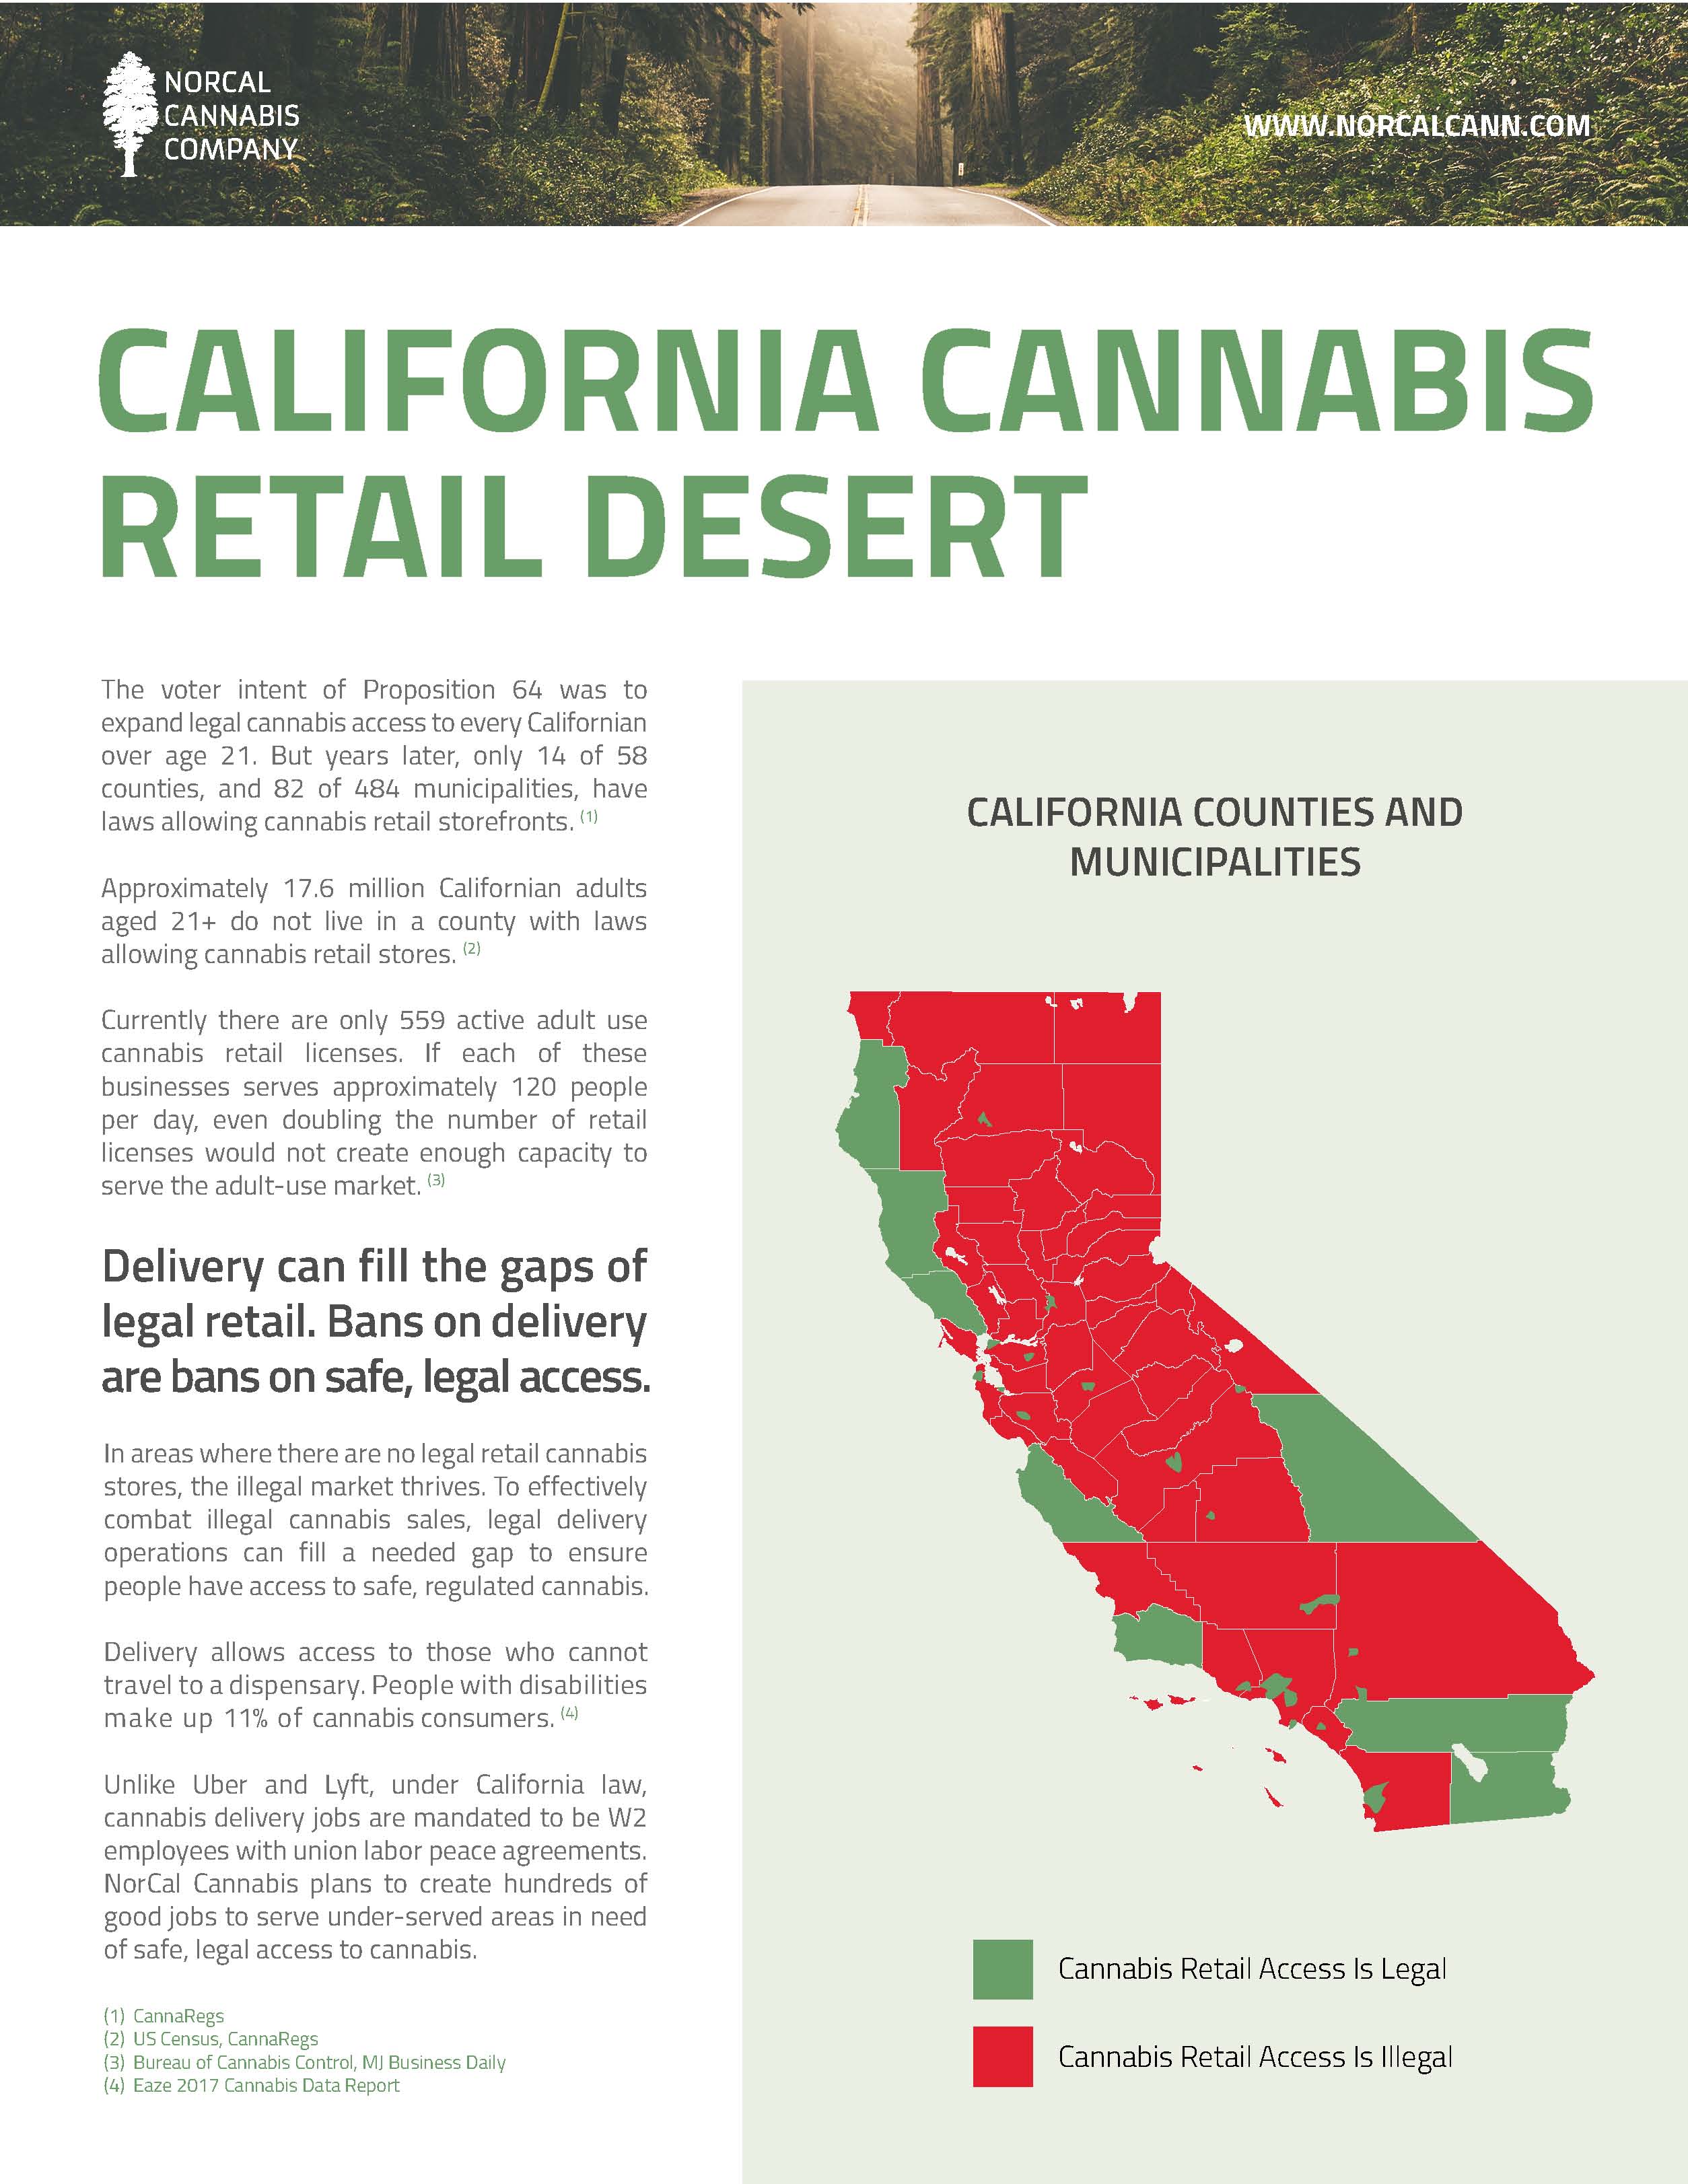 Cannabis Dester Map v. 3 Most Updated 04.24.2019